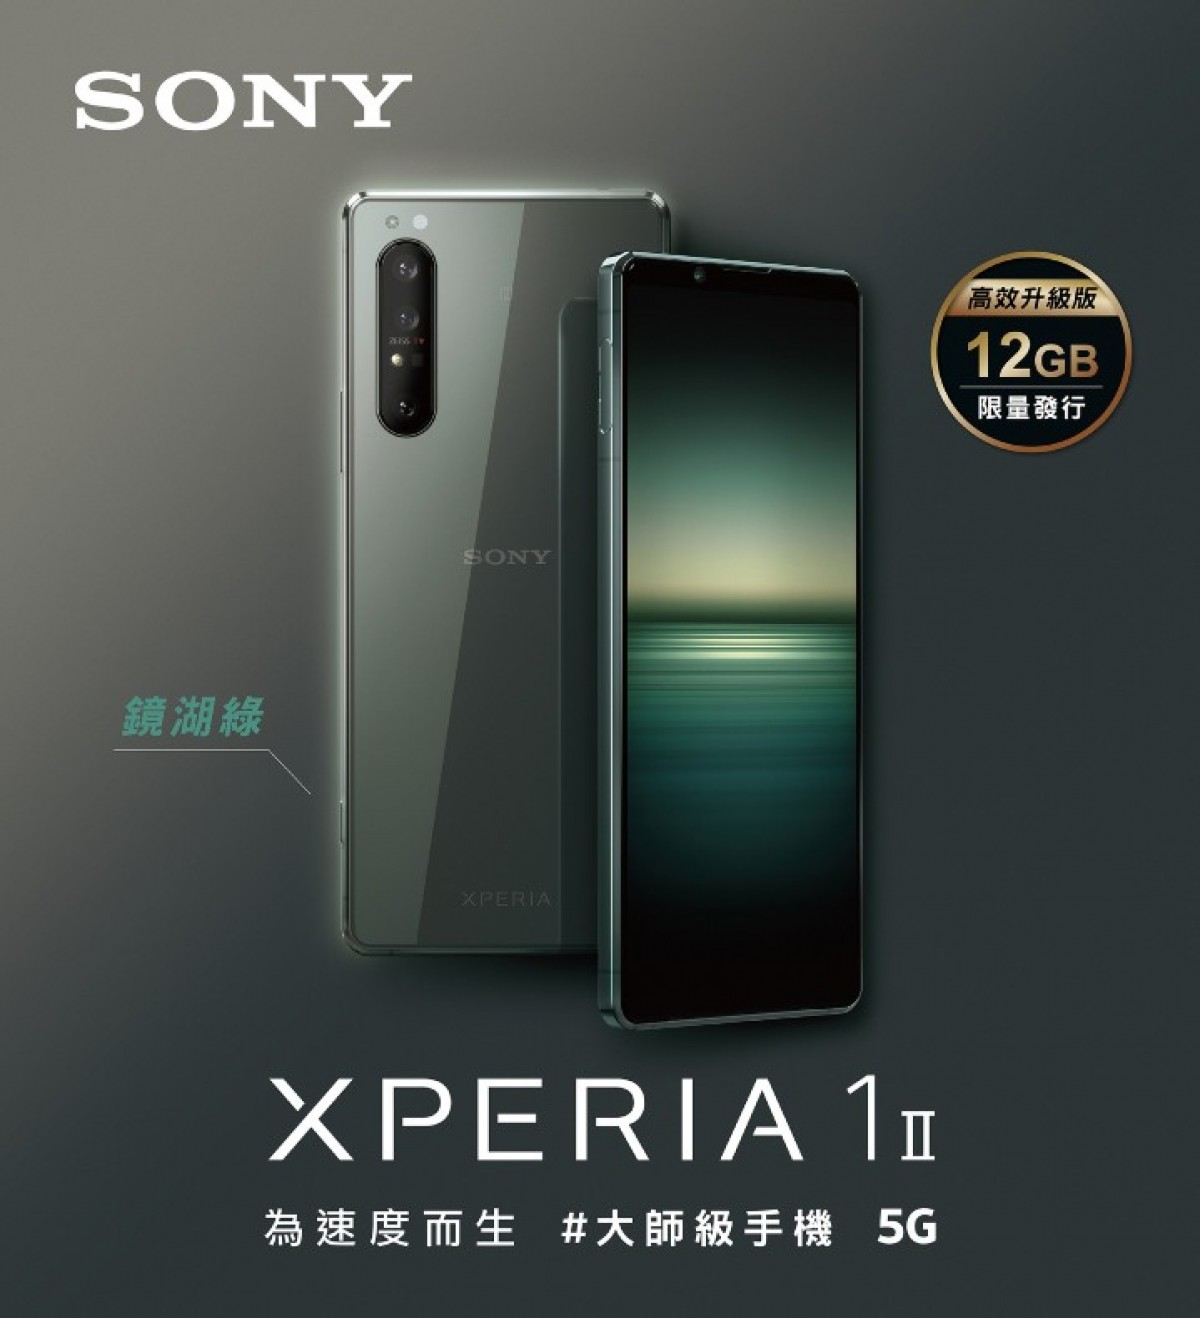 Sony Xperia 1 II in new Mirror Lake Green color is headed to Taiwan with more RAM